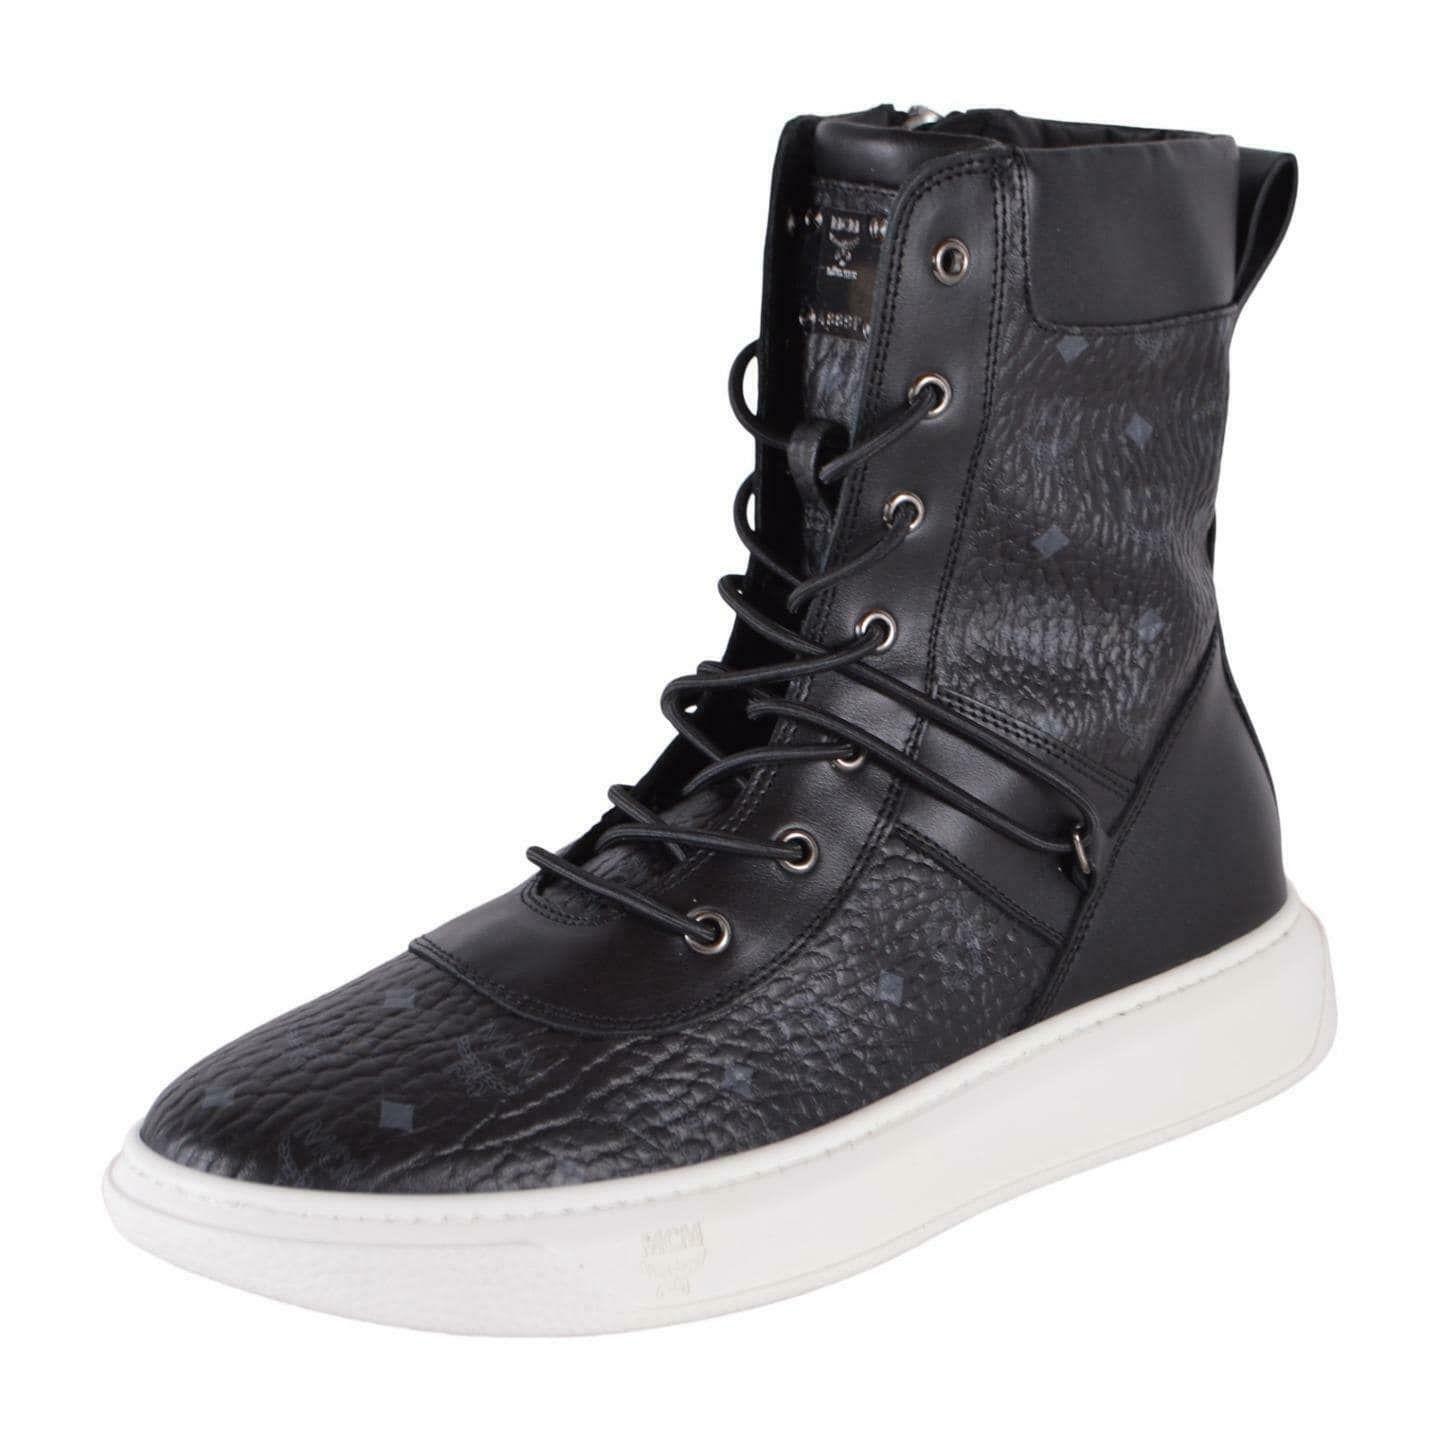 women's ankle boot sneakers